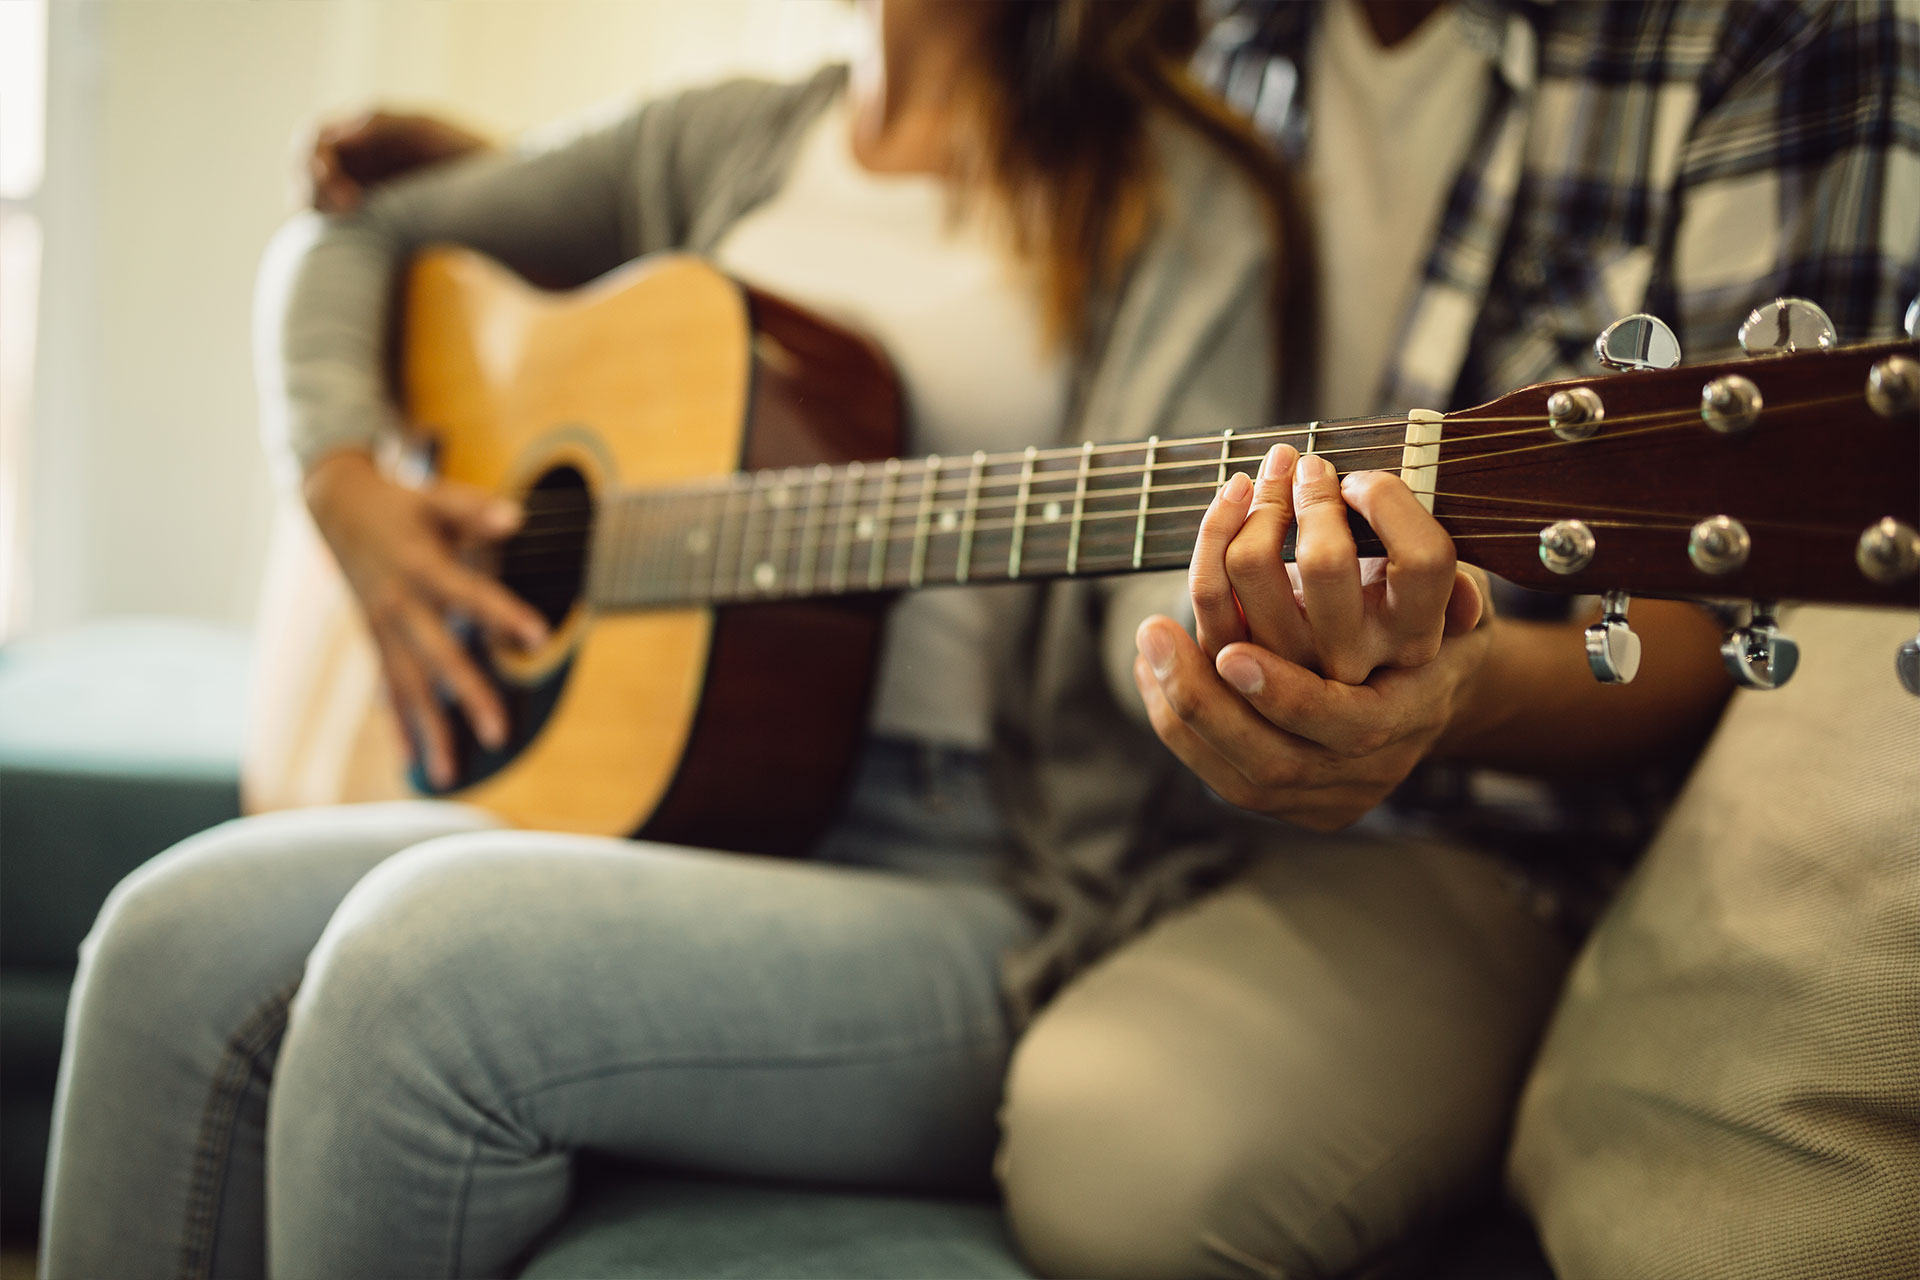 The 8 Open Guitar Chords For Beginners